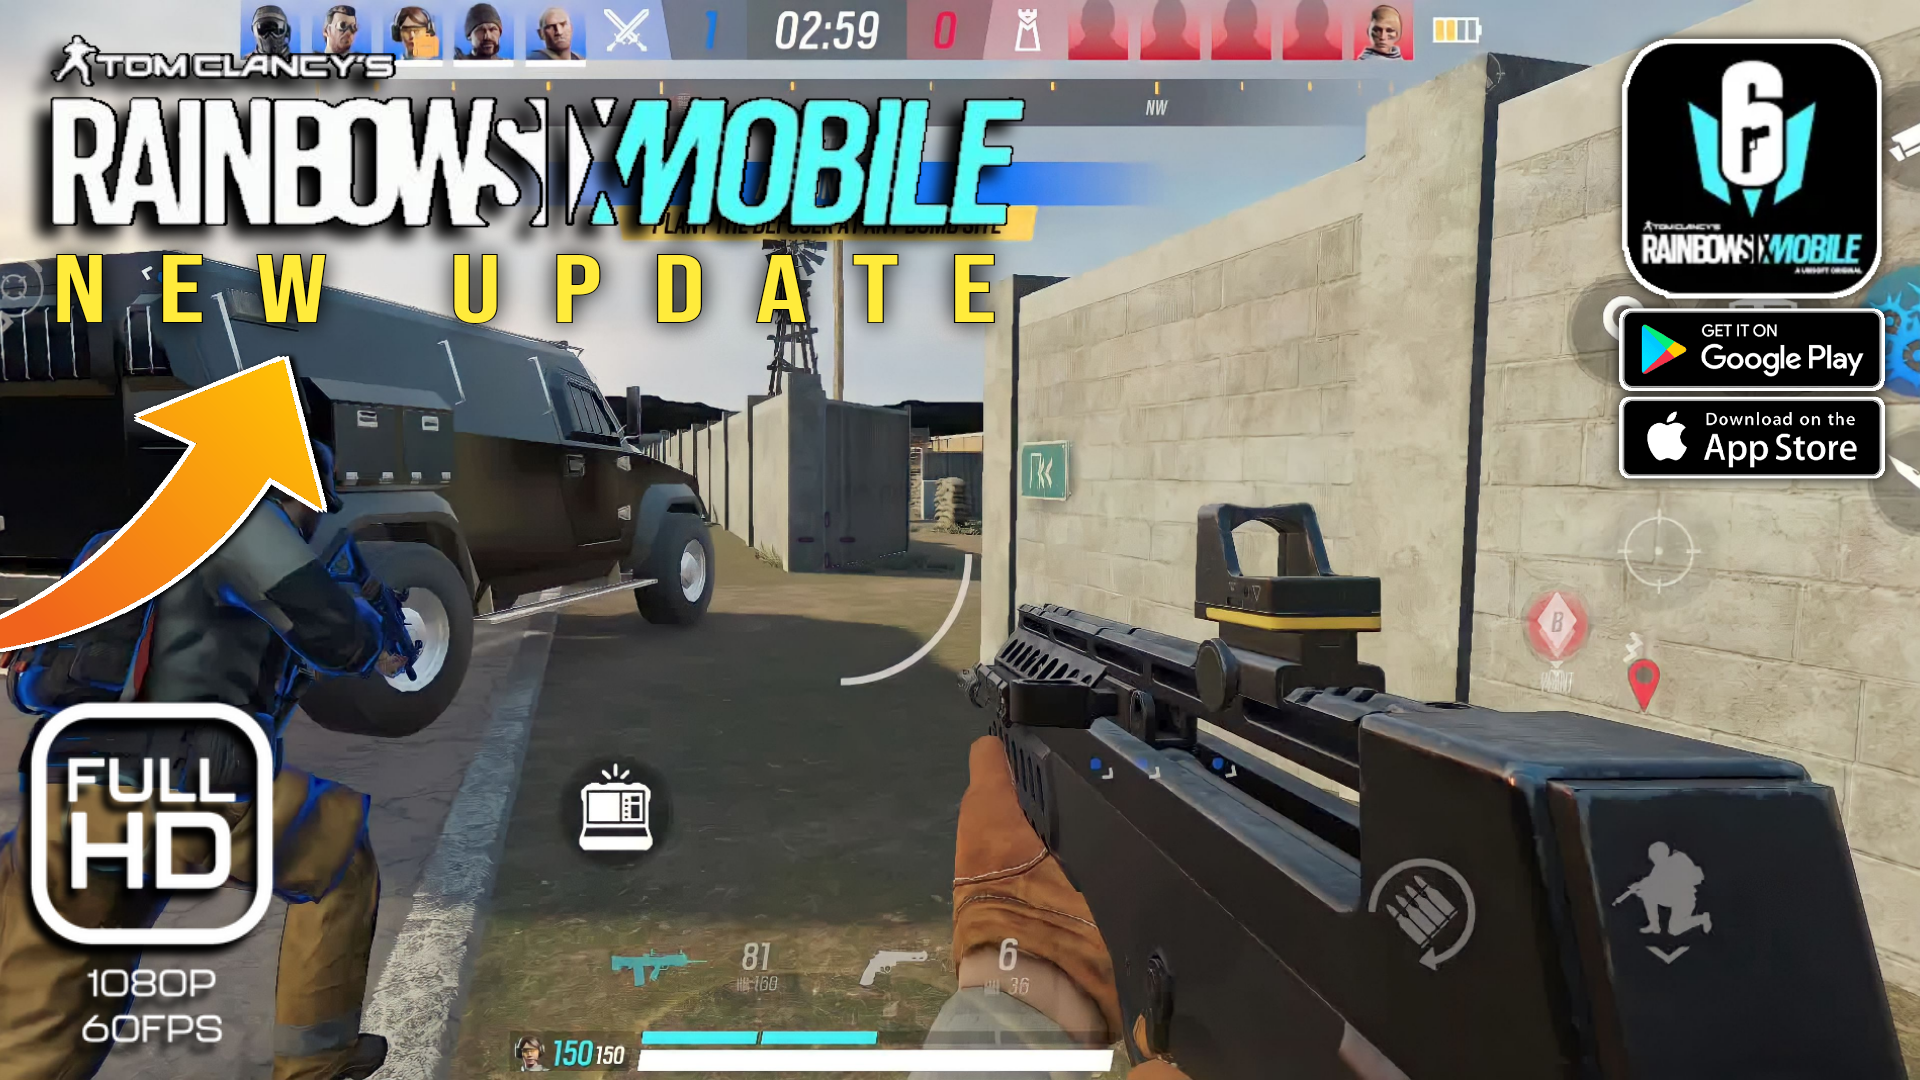 Rainbow Six Mobile Ultra Graphics Gameplay (Android, iOS) - Part 2